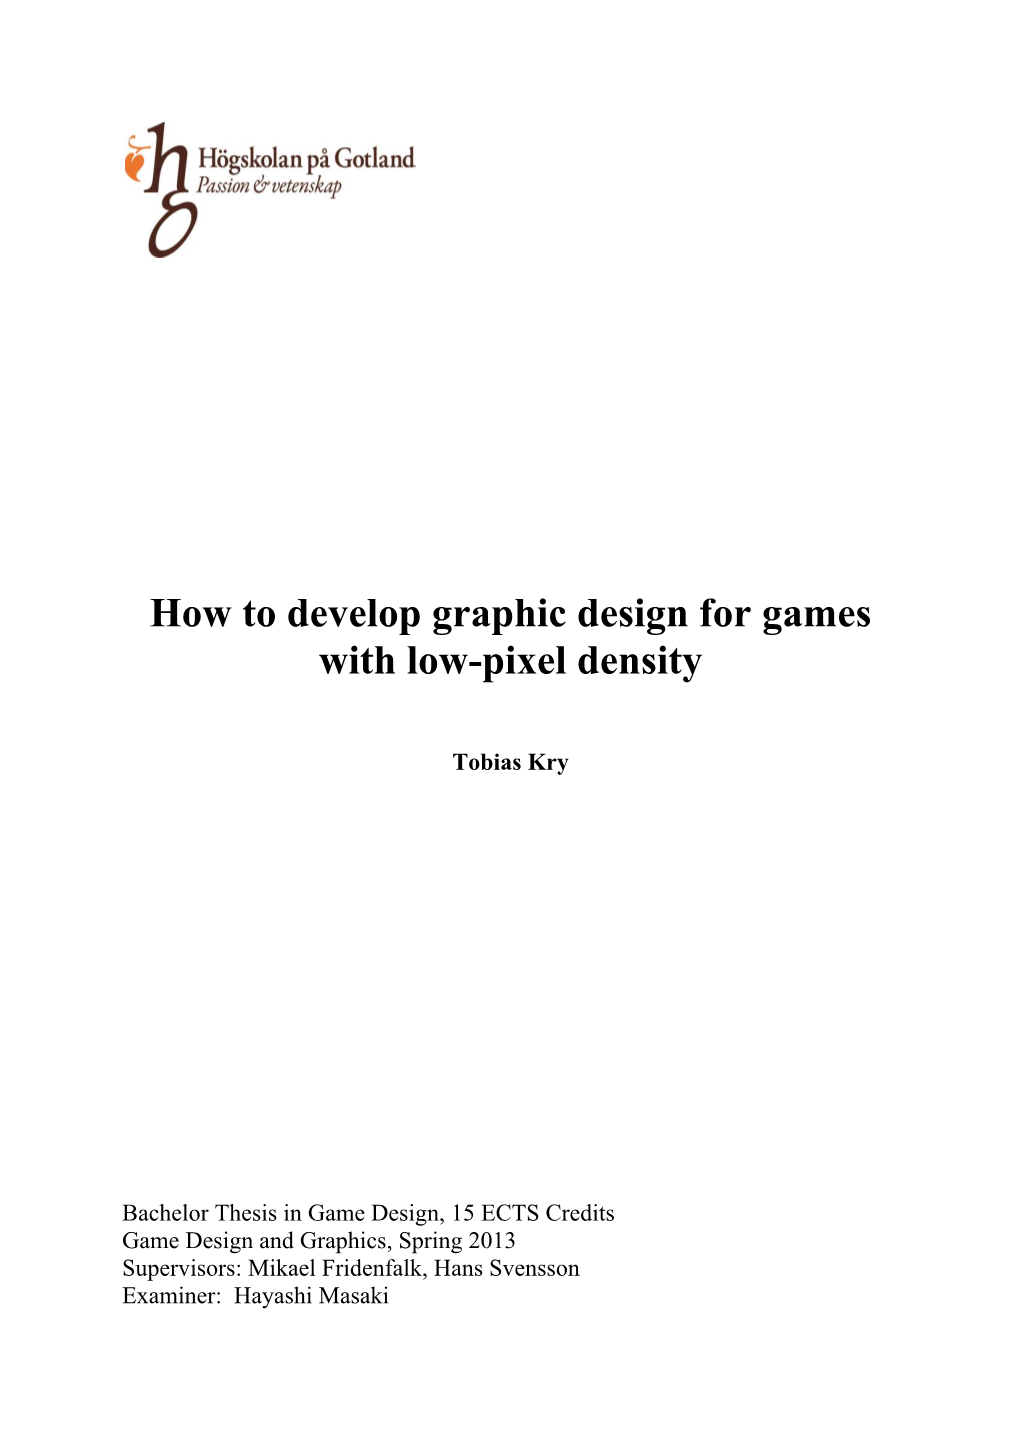 How to Develop Graphic Design for Games with Low-Pixel Density